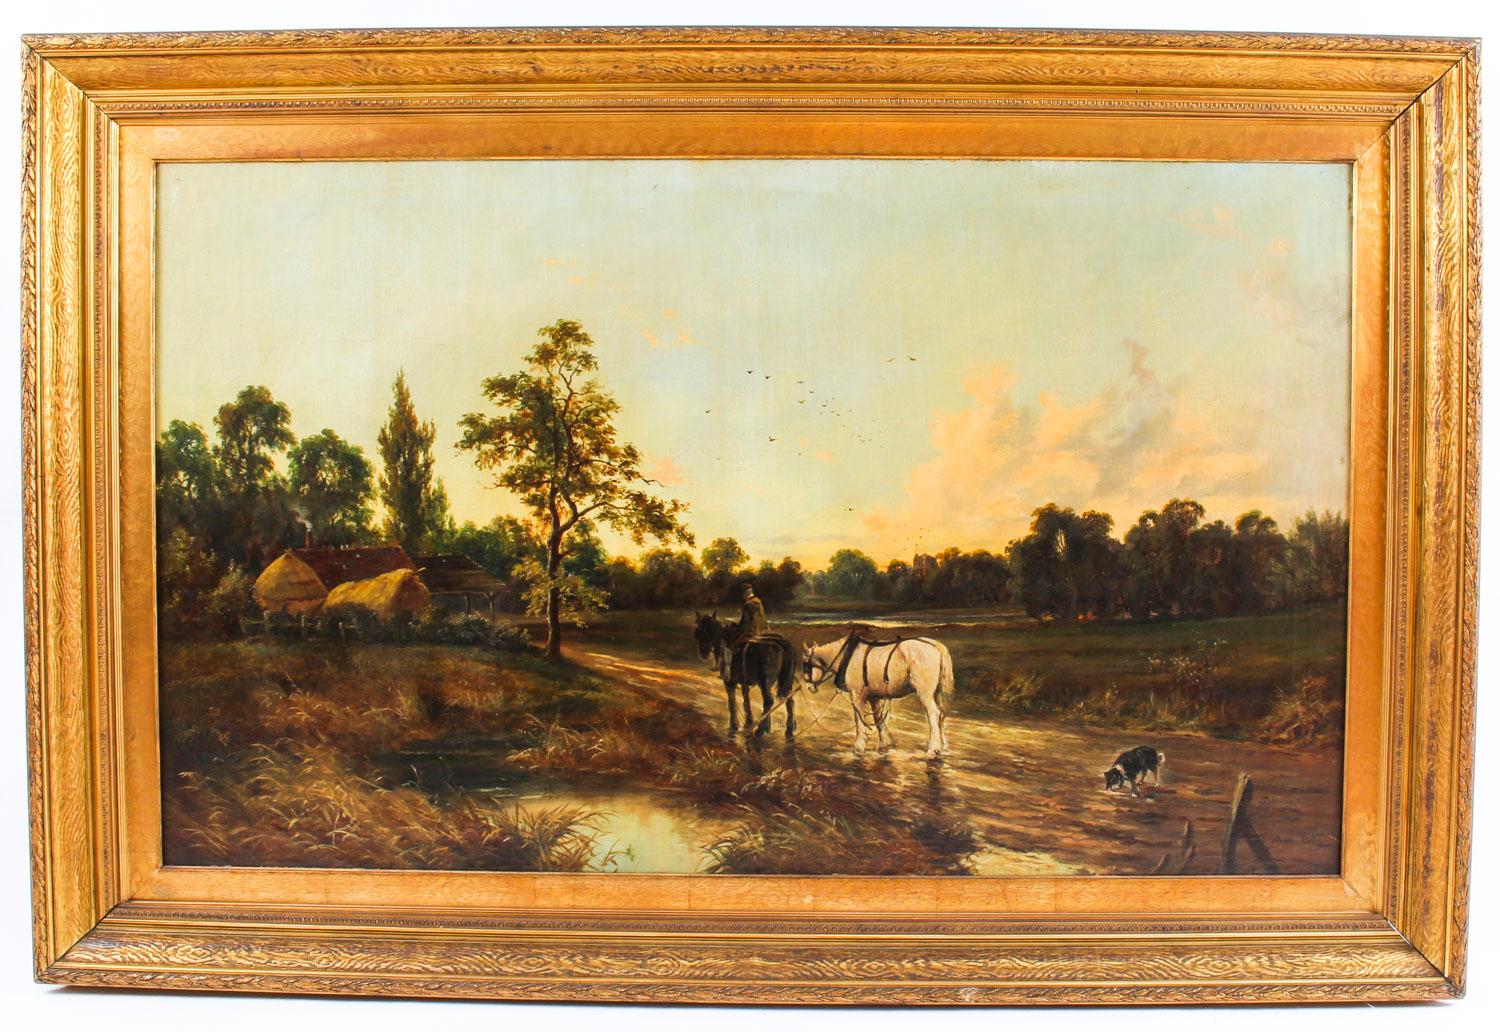 Antique Oil on Canvas Landscape Painting by G. Mallet, 19th Century 7